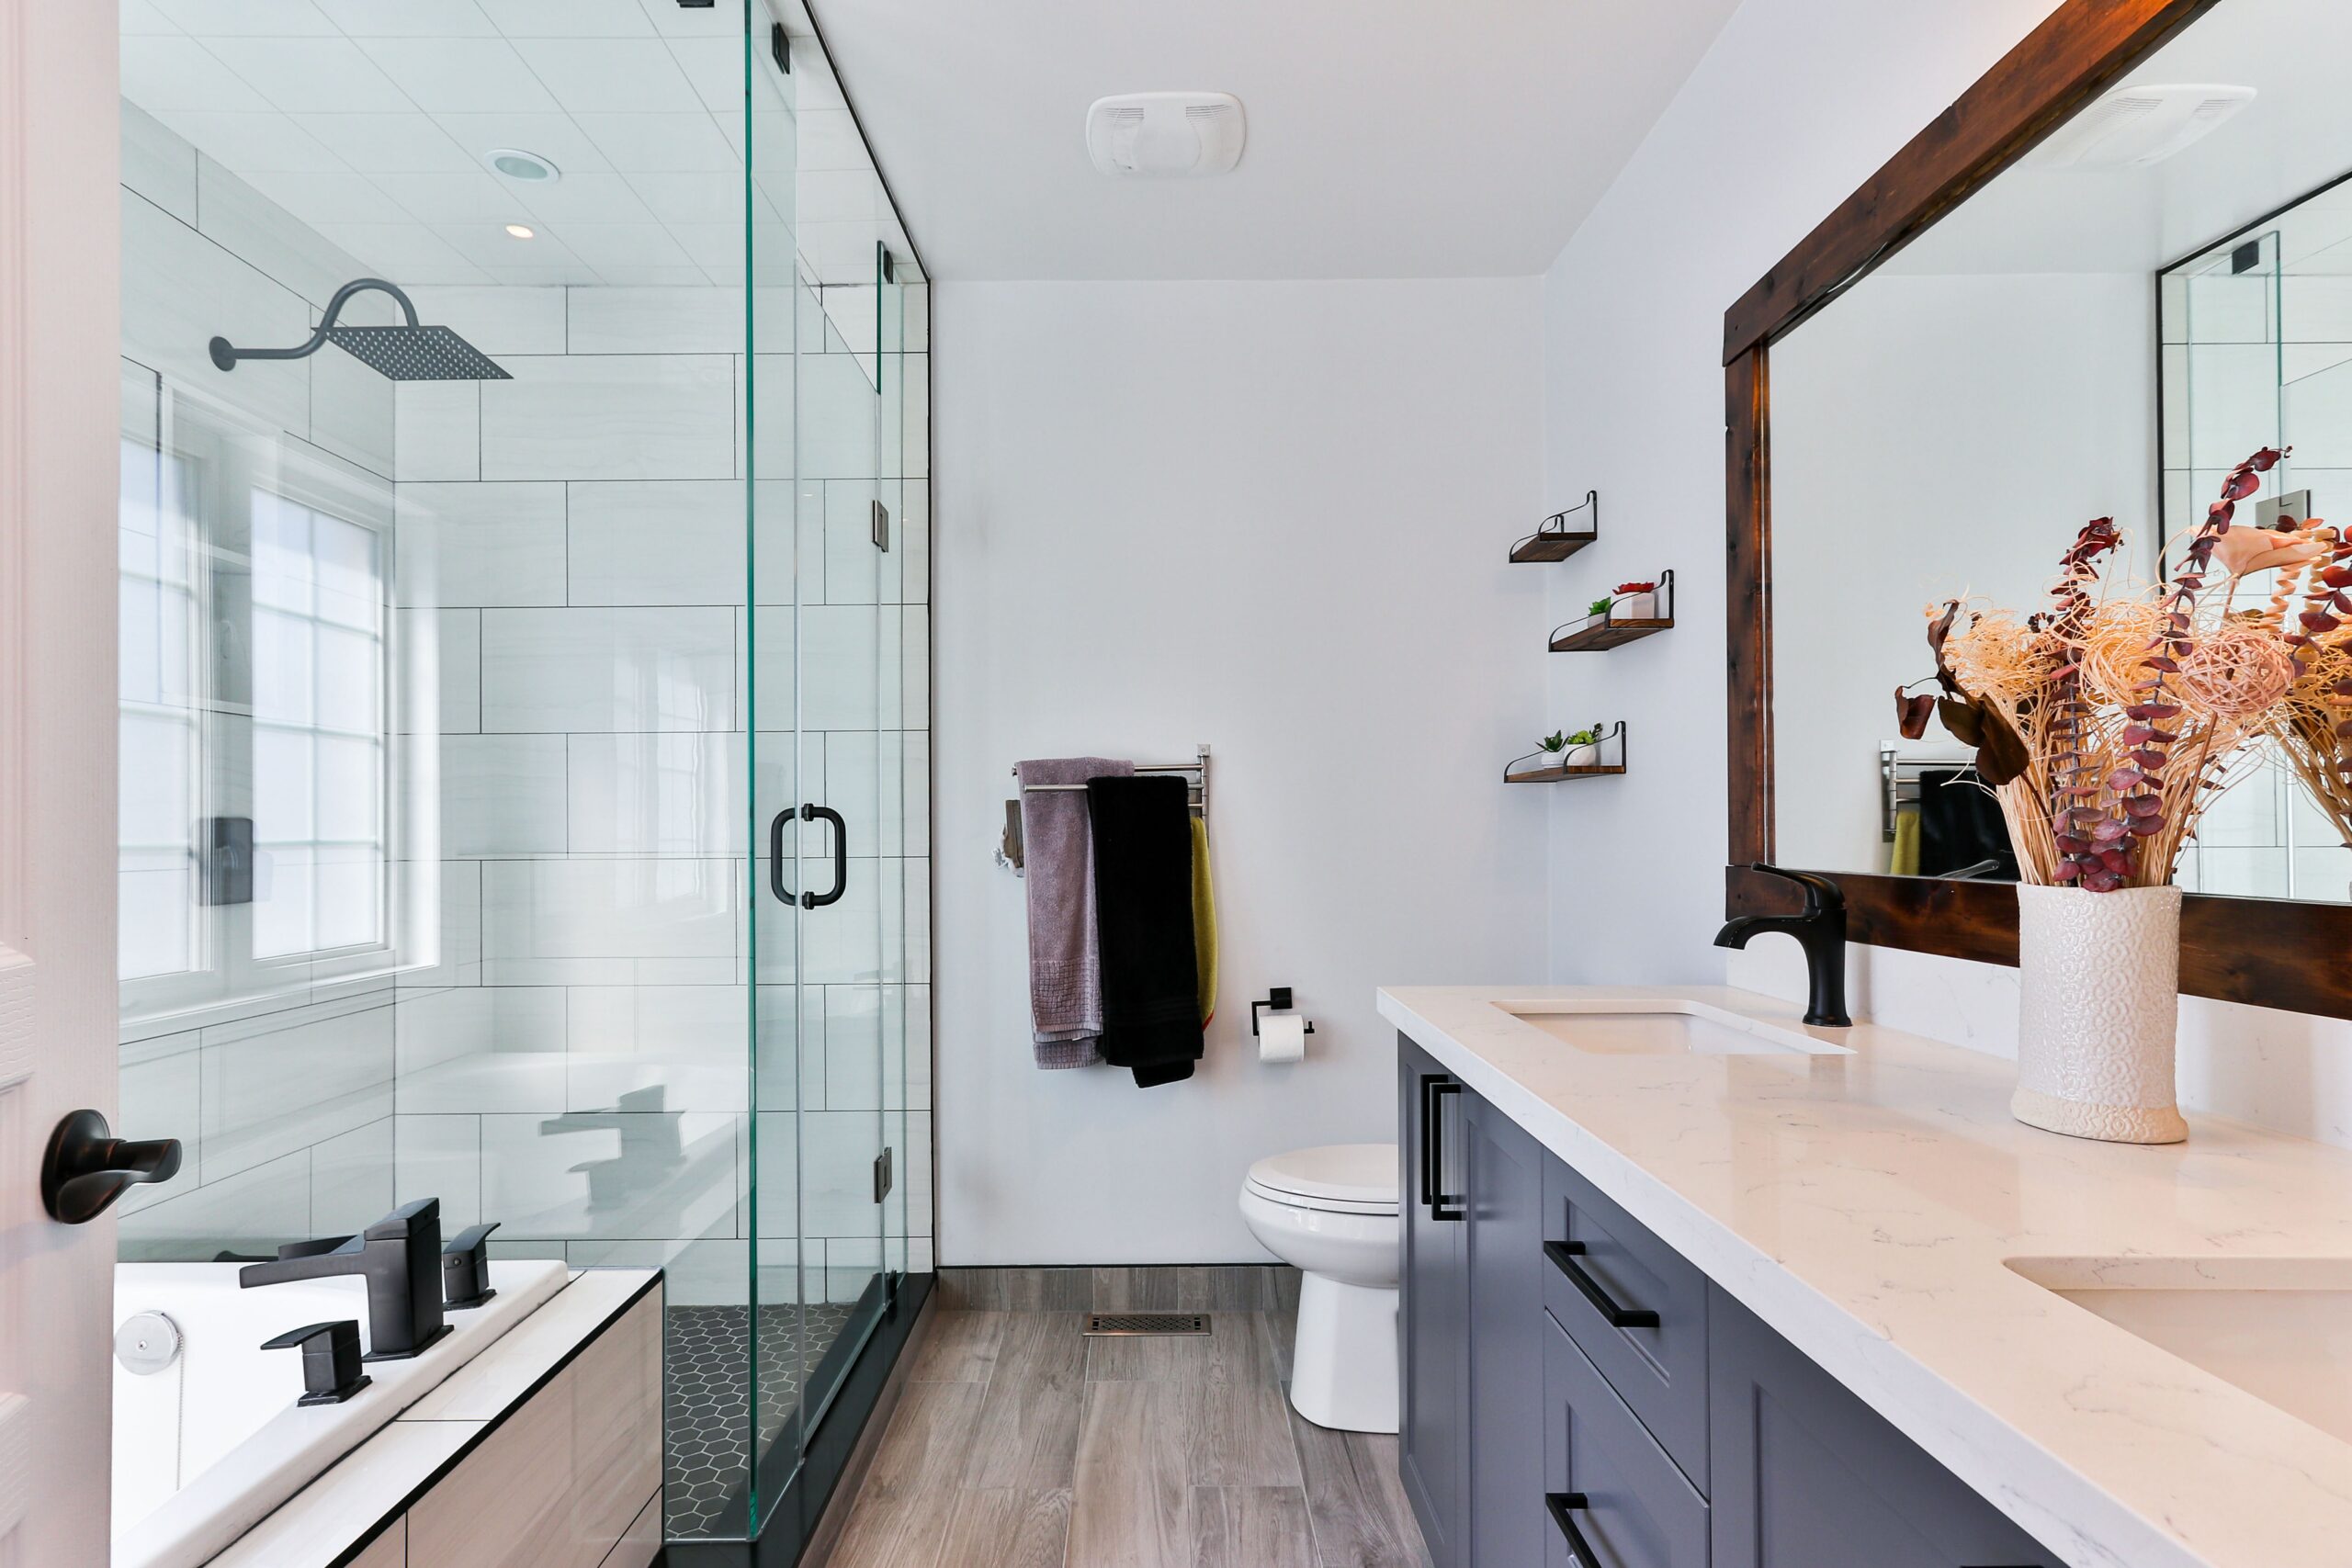 Image of a spacious bathroom, with a modern walk in shower, bathtubm and two vanity sinks.